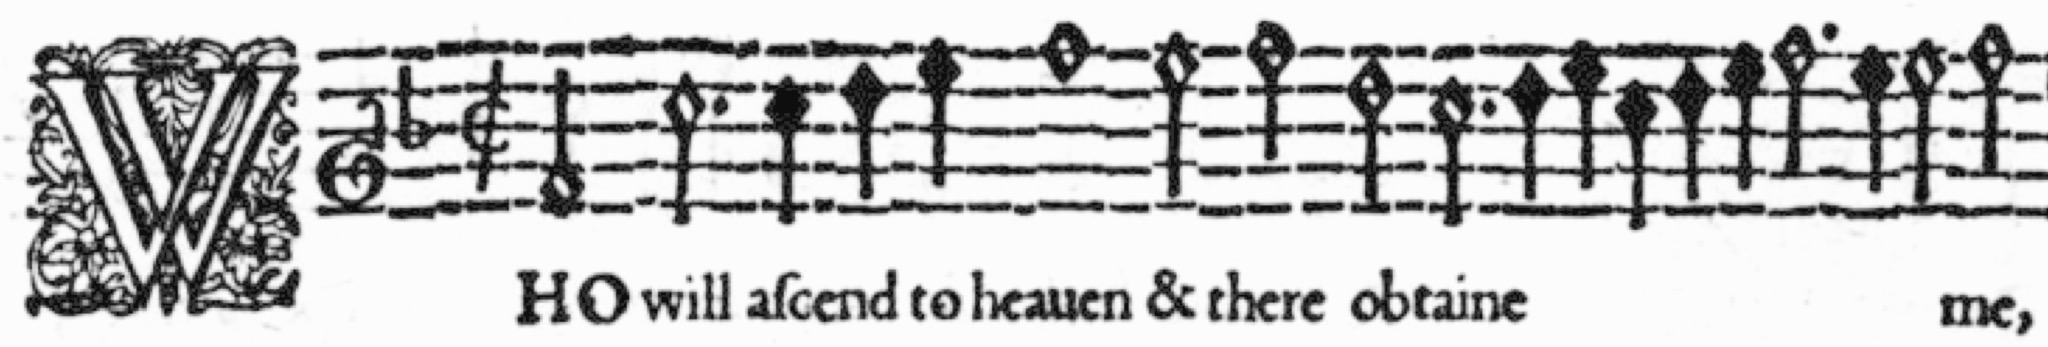 Image showing musical notation with the lyric 'Who will ascend to heaven and there obtain me' beneath the staff